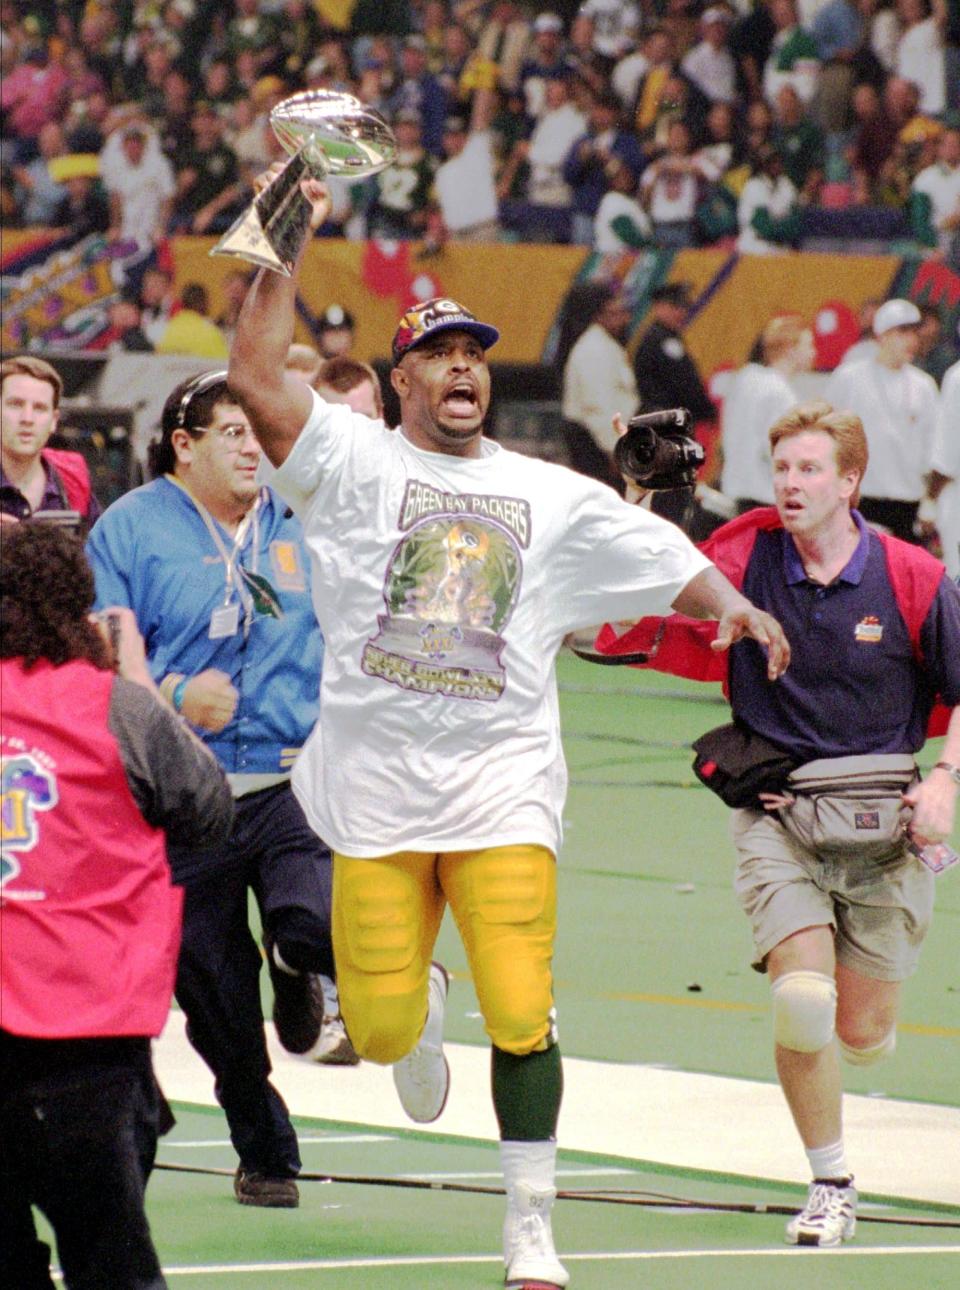 After winning Super Bowl XXXI, bringing the Lombardi Trophy back to Green Bay for the first time since 1967, Reggie White circled the Superdome in New Orleans with the prize. "It was the most fun I've ever had working," writes Patrick. "While watching 30 to 40 photographers chase Reggie around the field, I decided to wait in the end zone for him."